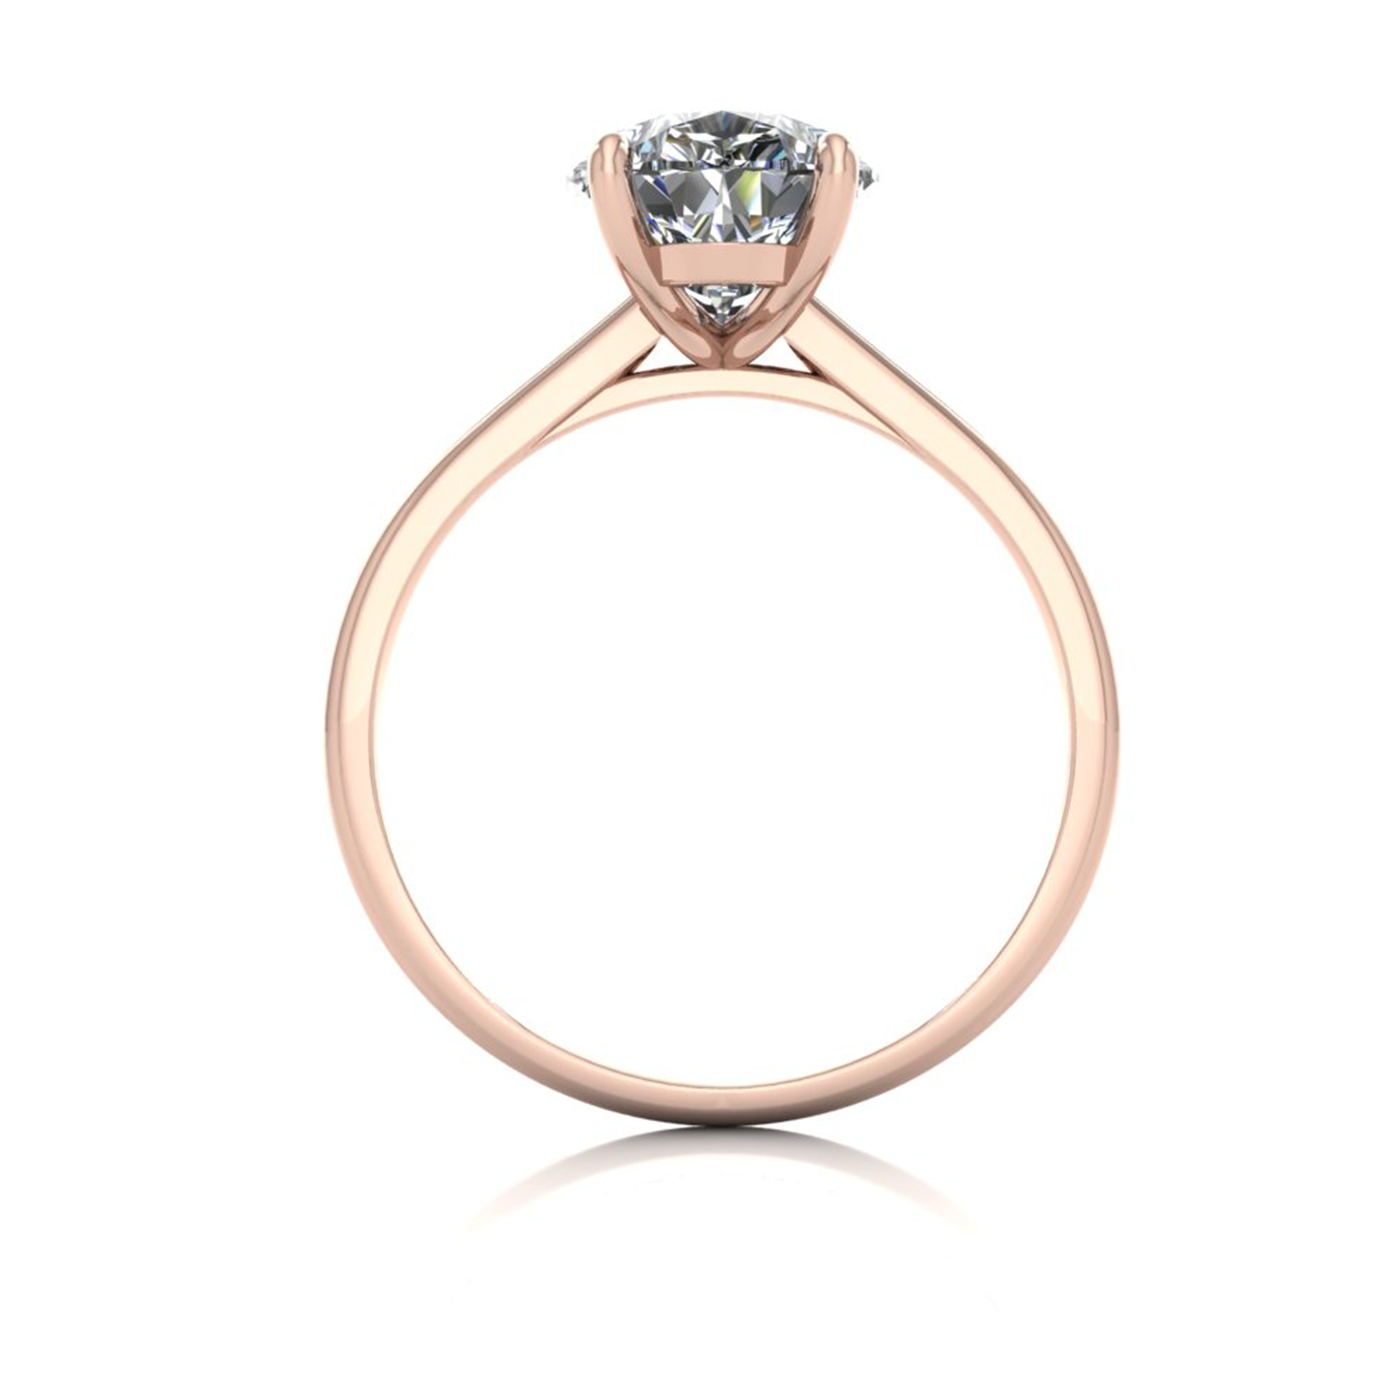 18k rose gold  2,50 ct 3 prongs solitaire pear cut diamond engagement ring with whisper thin band